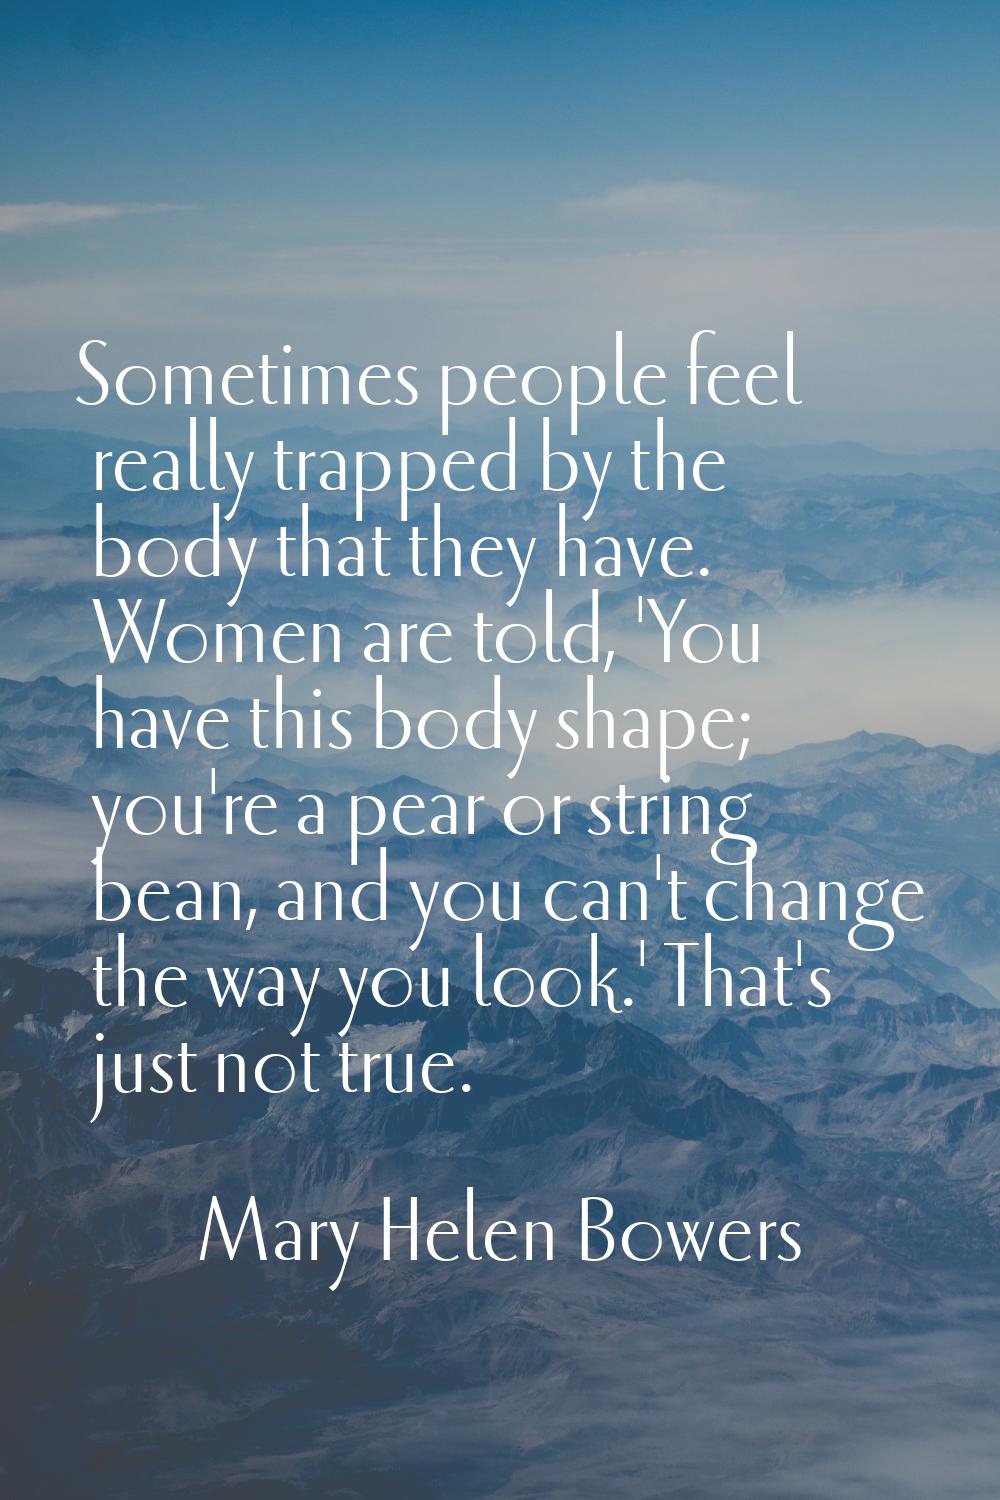 Sometimes people feel really trapped by the body that they have. Women are told, 'You have this bod